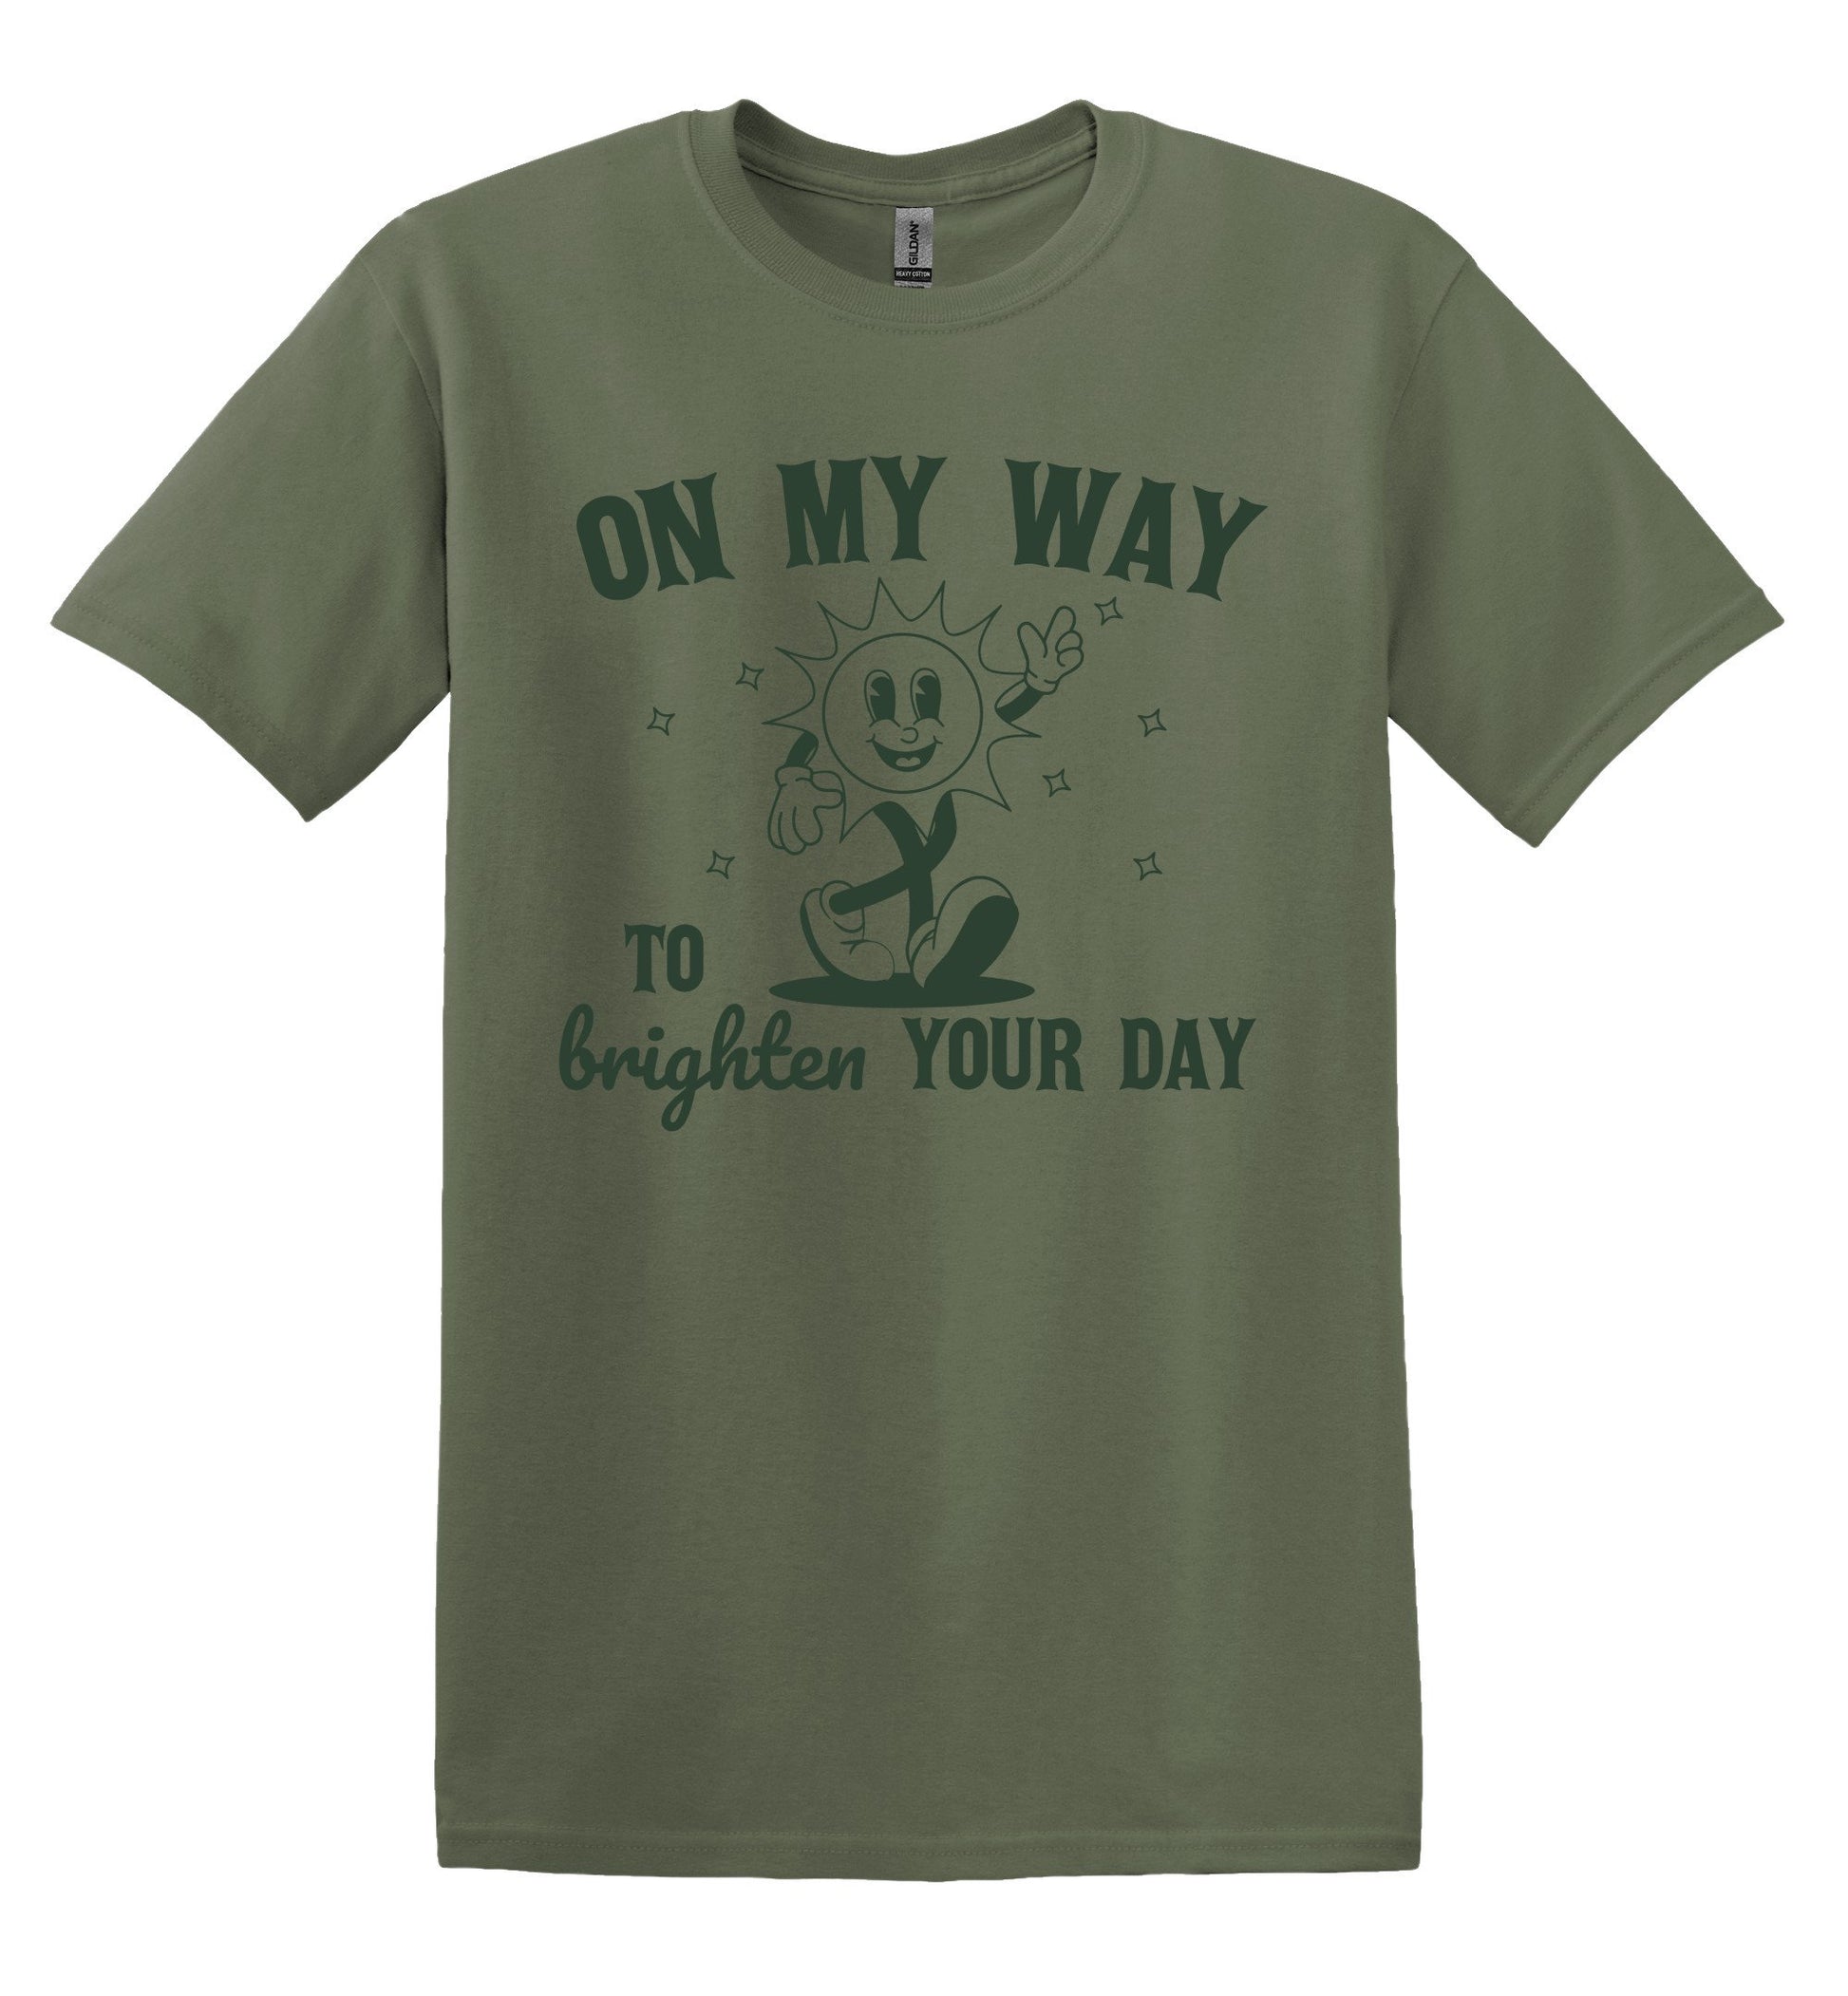 On My Way to Bright Your Day T-shirt Graphic Shirt Funny Adult TShirt Vintage Funny TShirt Nostalgia T-Shirt Relaxed Cotton Tee T-Shirt